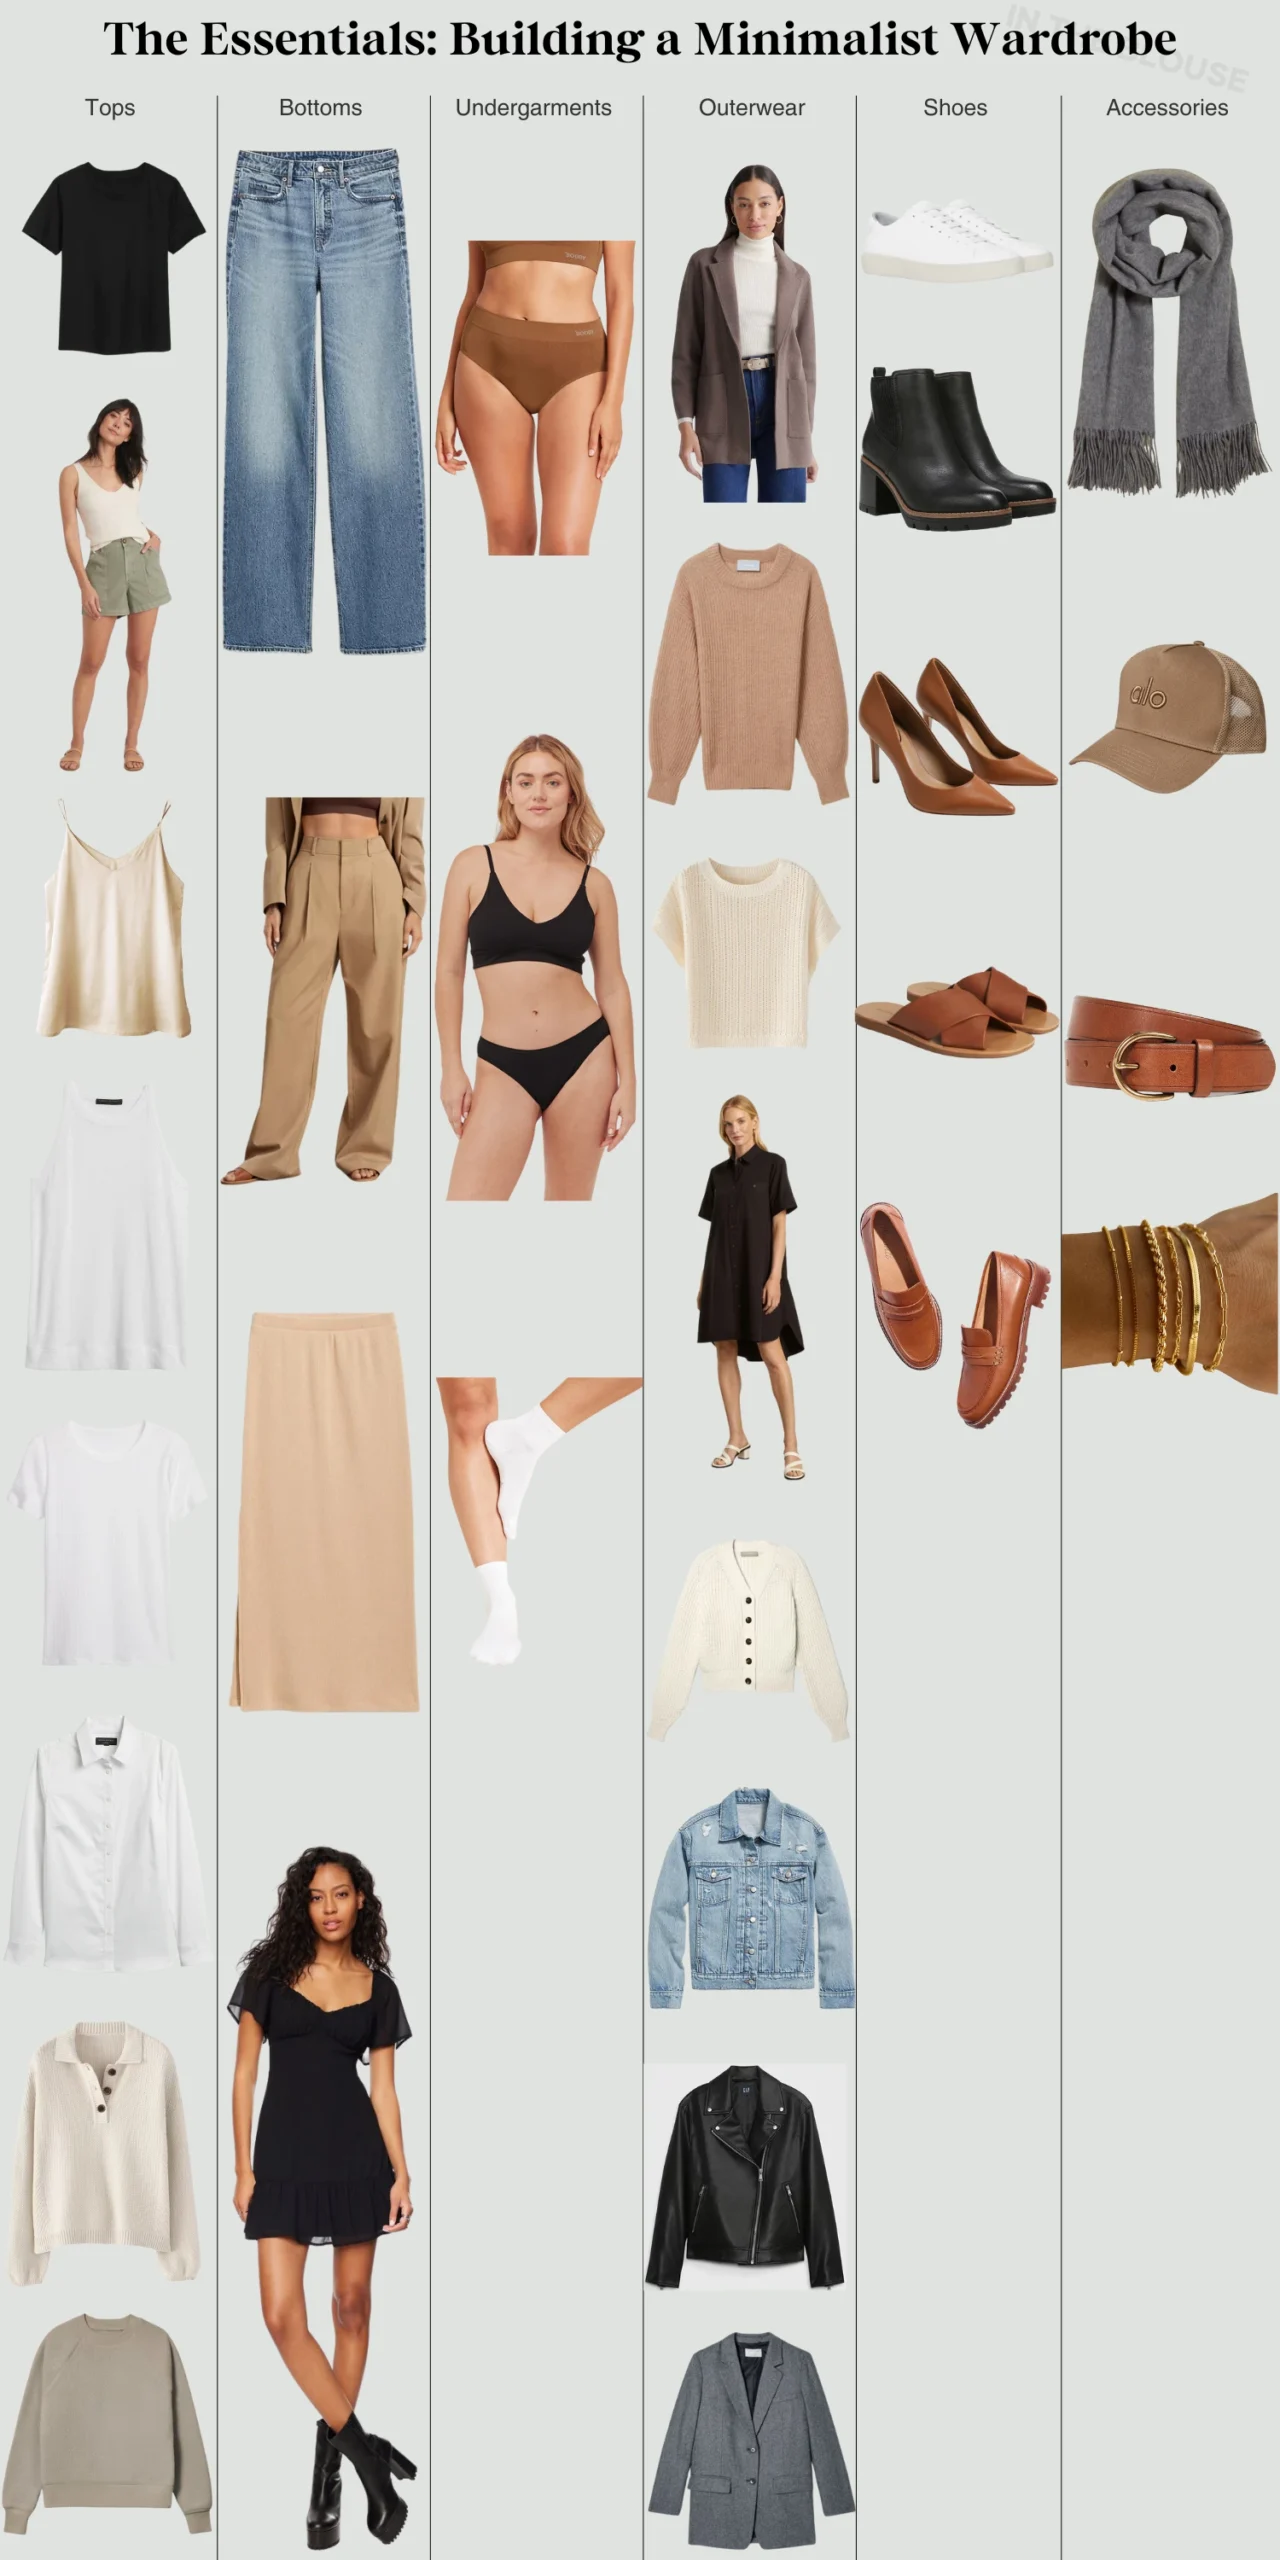 Aday  Capsule wardrobes of modern essentials and minimalist clothing.